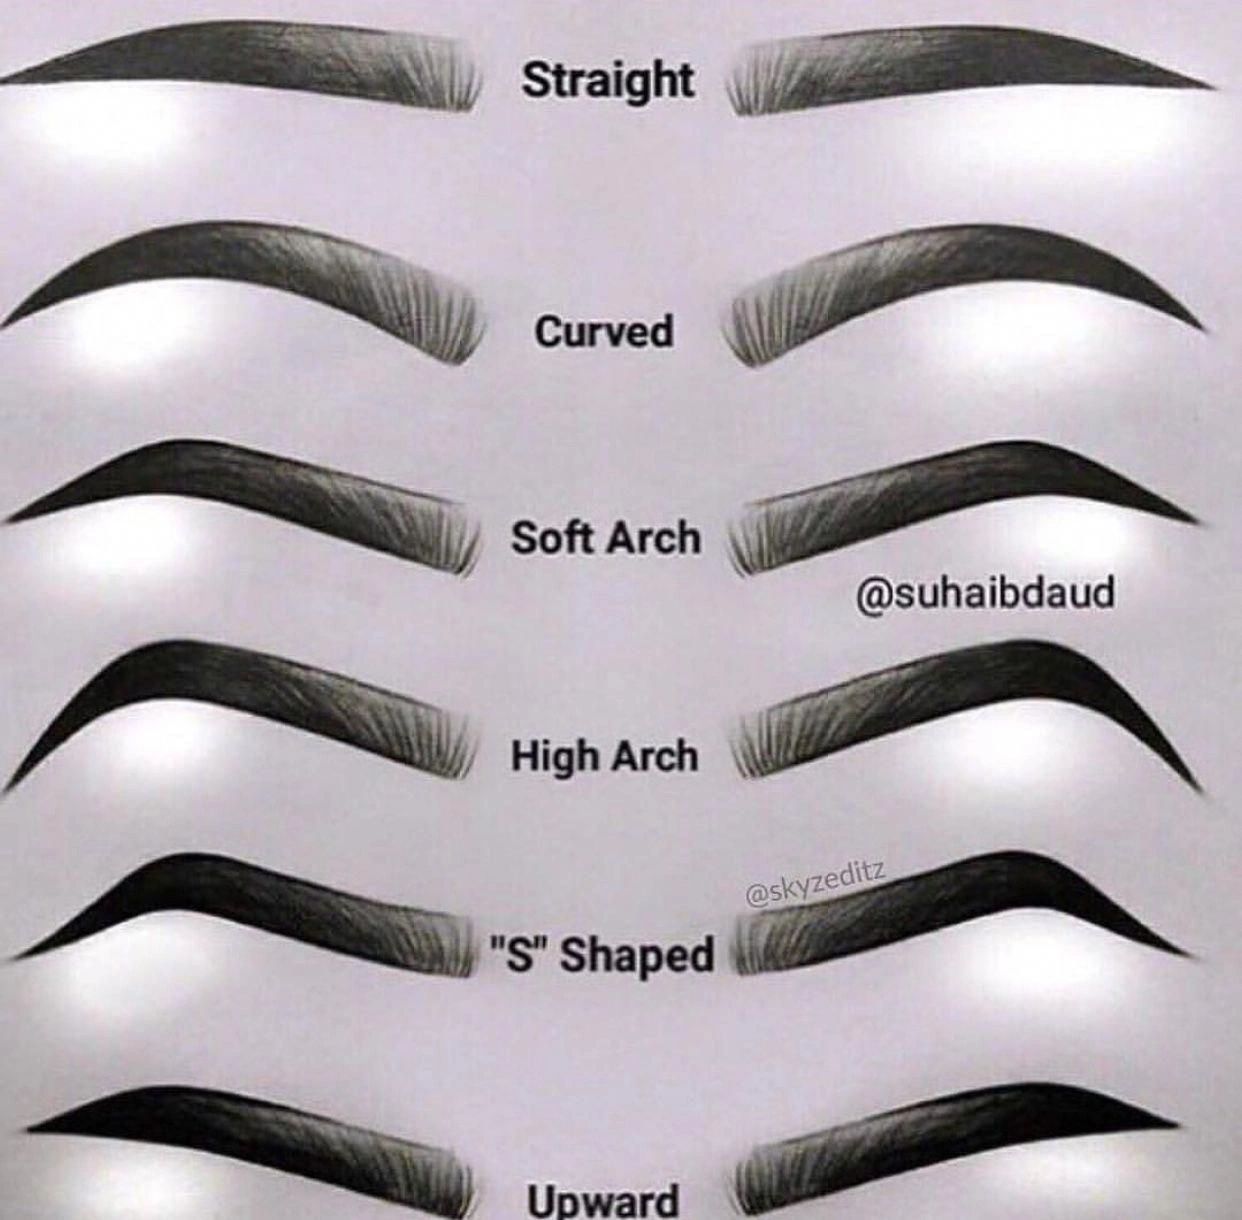 Educating On Different Eyebrow Shapes